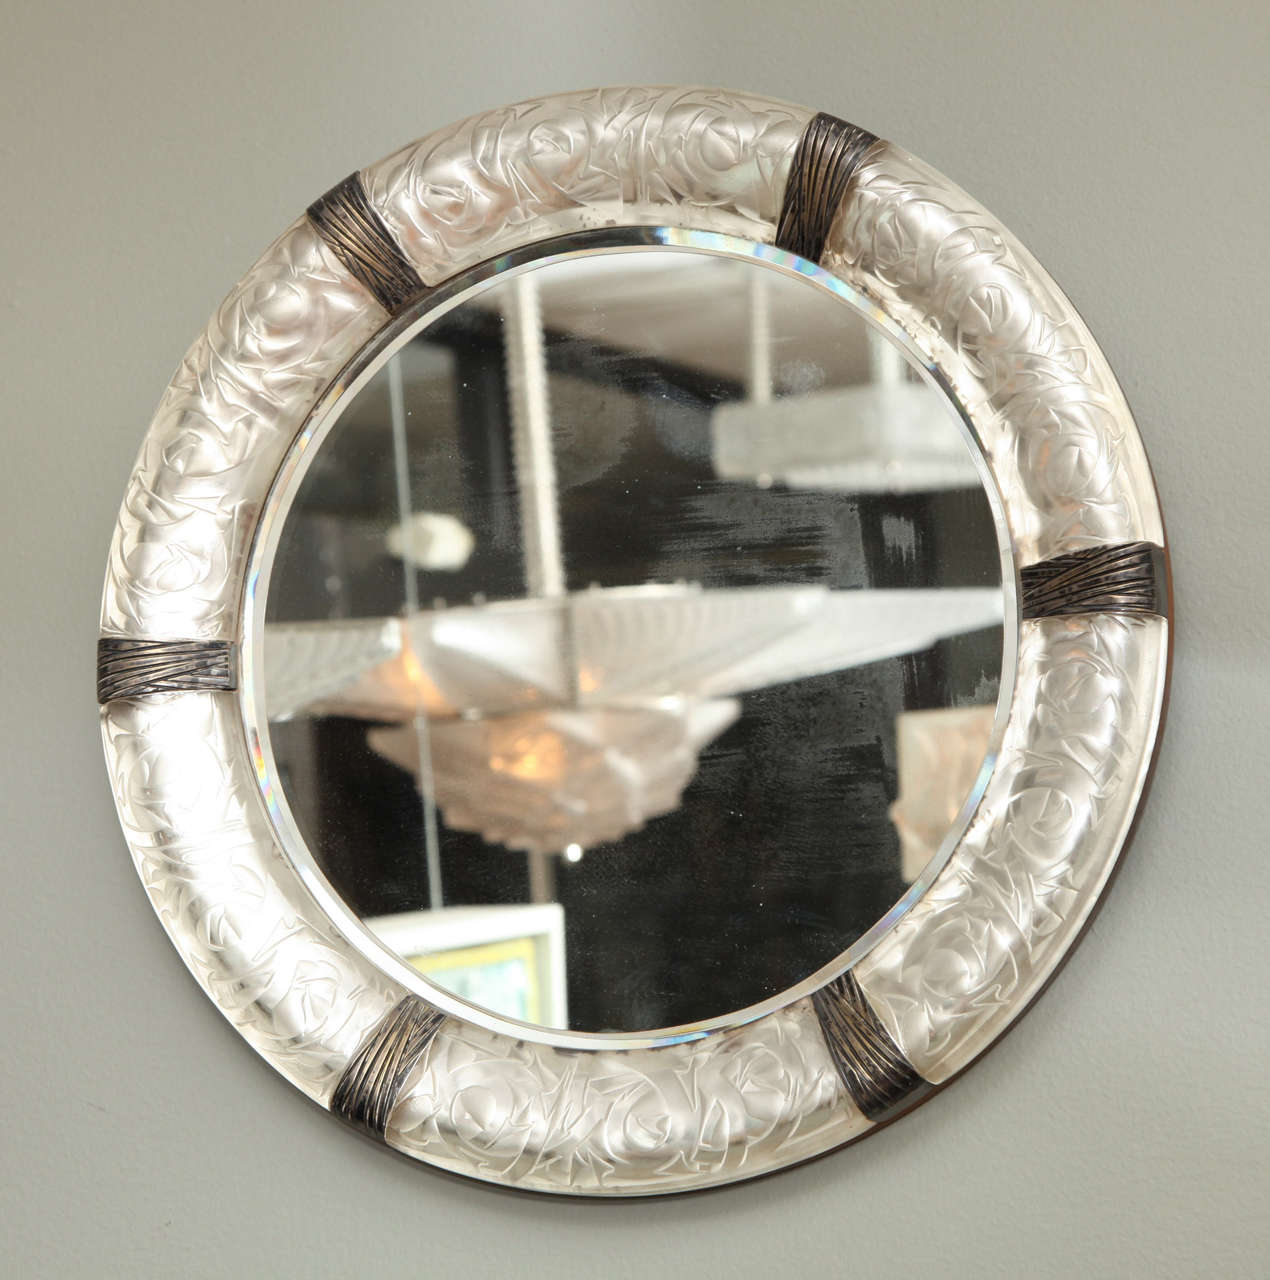 An important Rene Lalique round mirror, model 686 